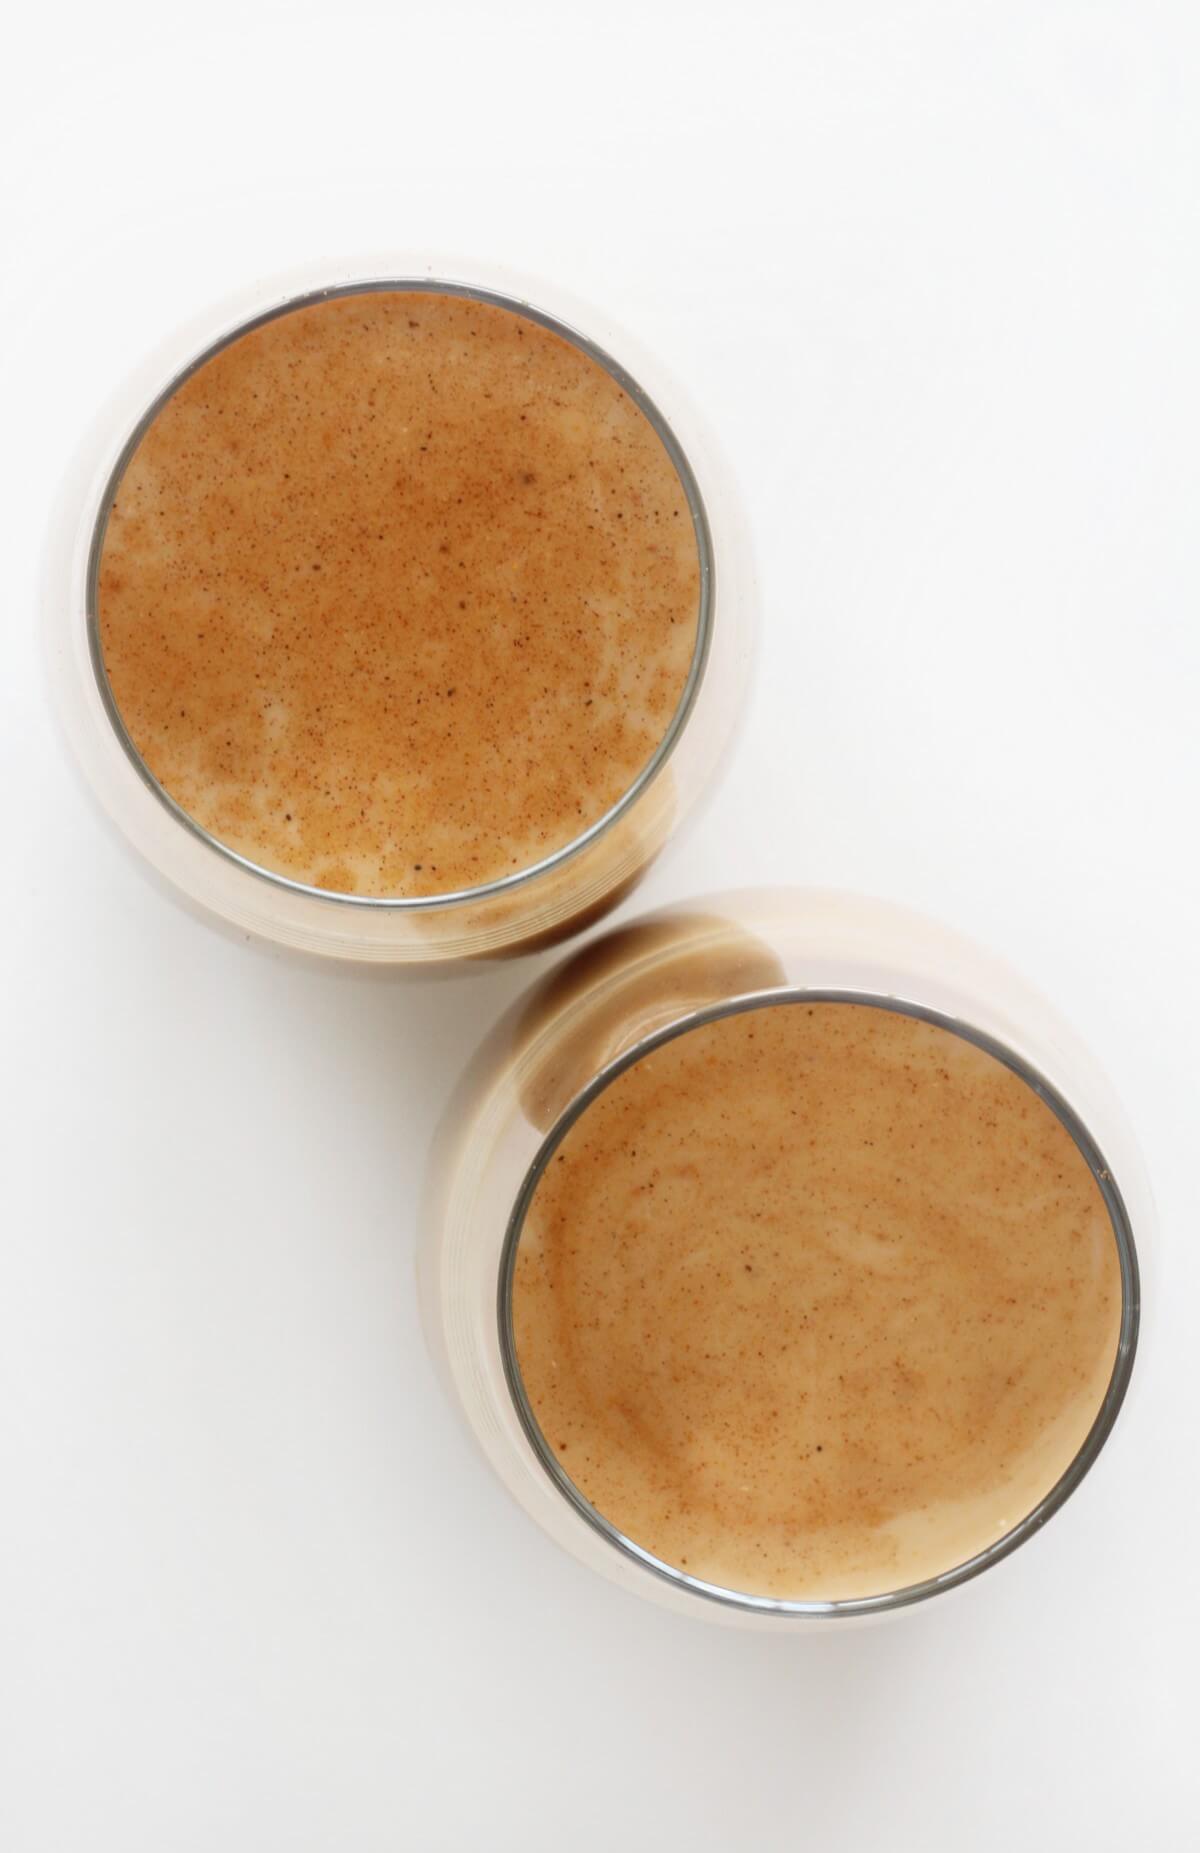 plain vegan pumpkin spice lattes without whipped cream